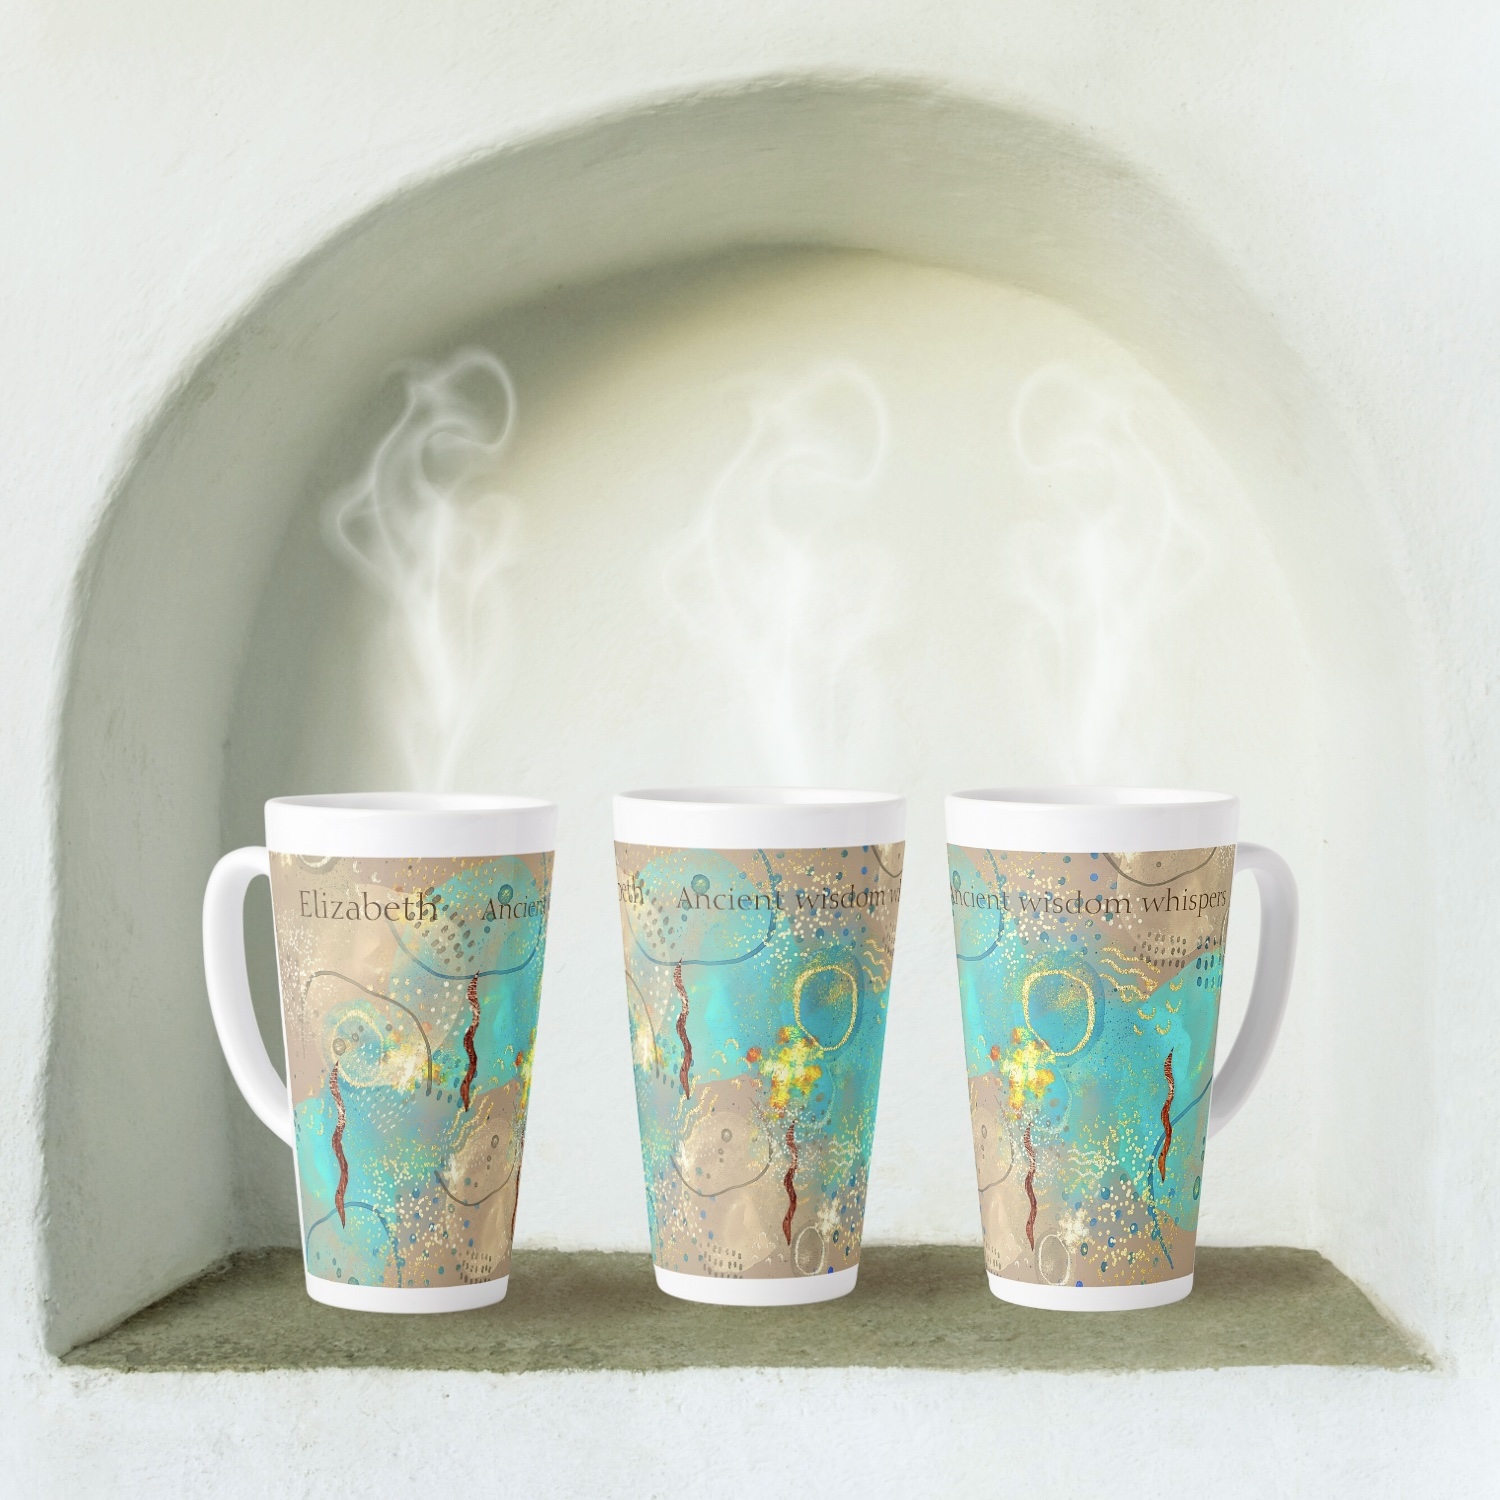 Turquoise Golden Mug: Find serenity in the timeless elegance of ancient wisdom